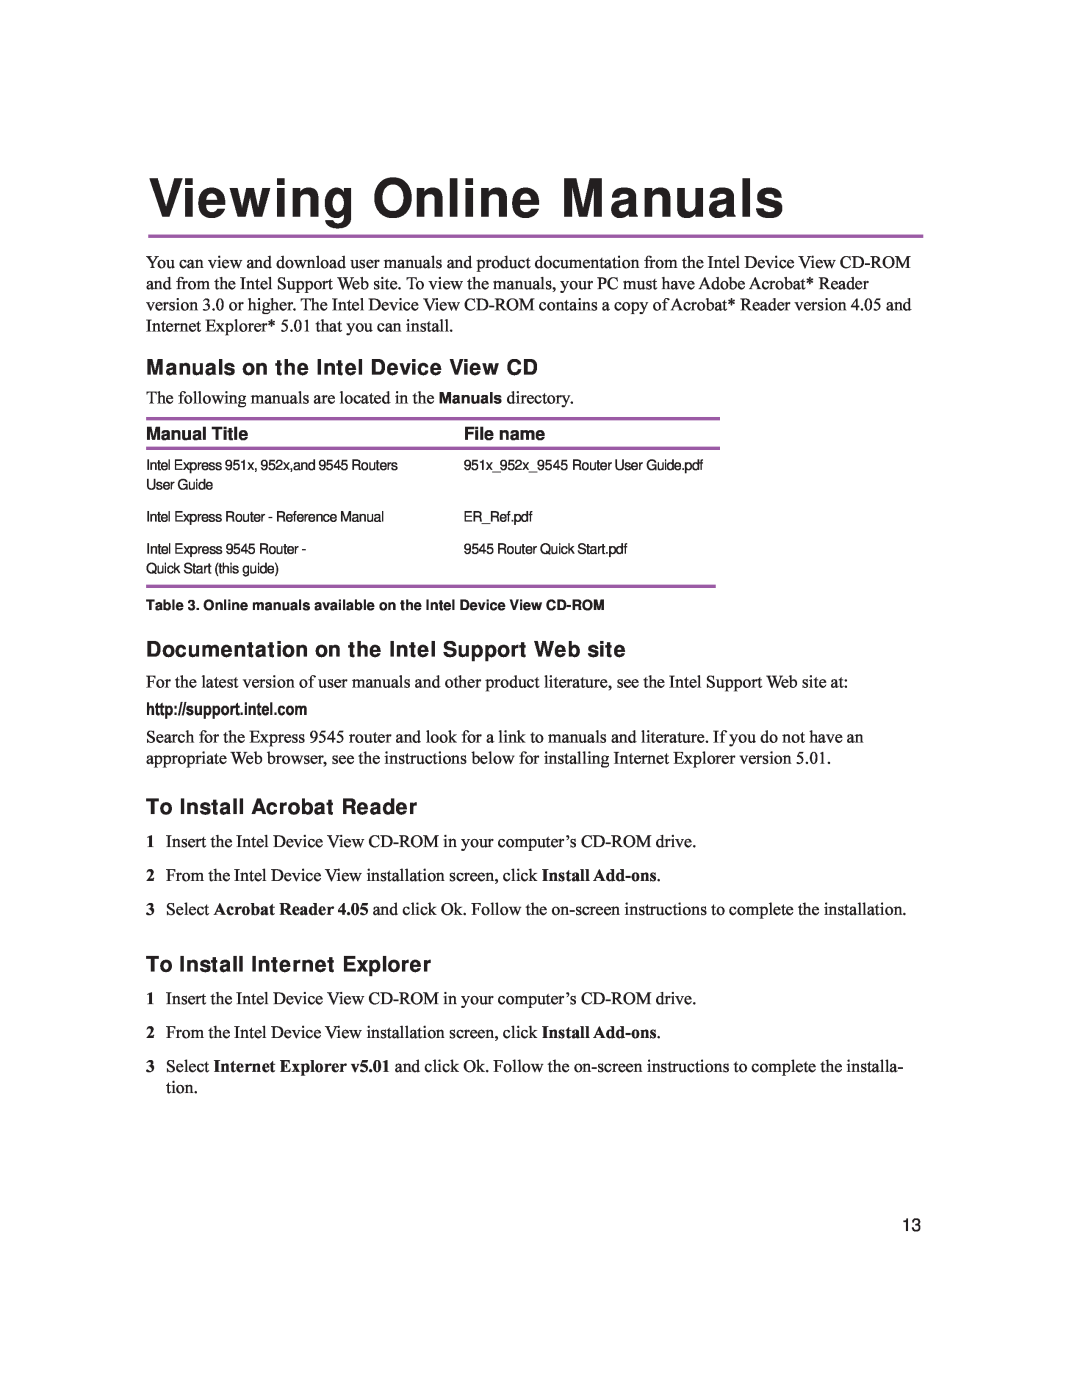 Intel 9545 Viewing Online Manuals, Manuals on the Intel Device View CD, Documentation on the Intel Support Web site 